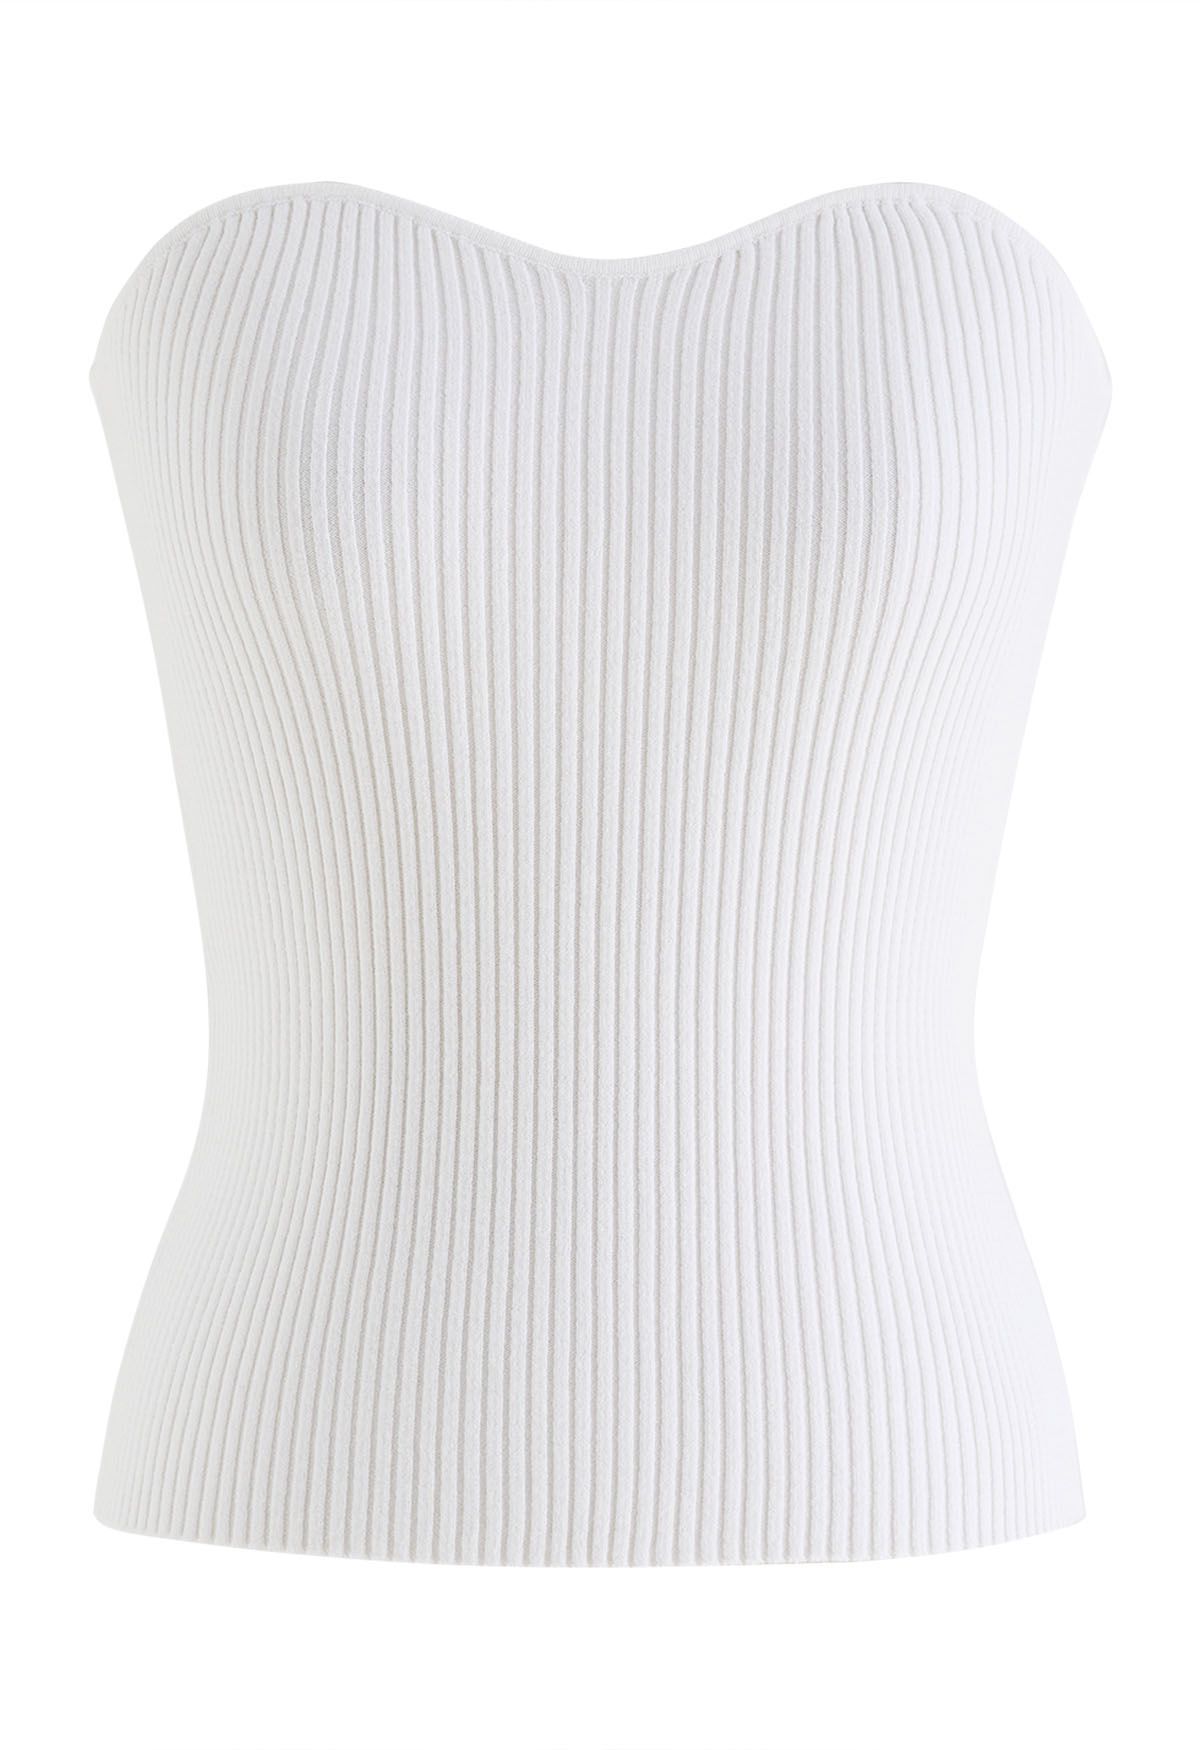 Rib Knit Bustier Tube Top in White